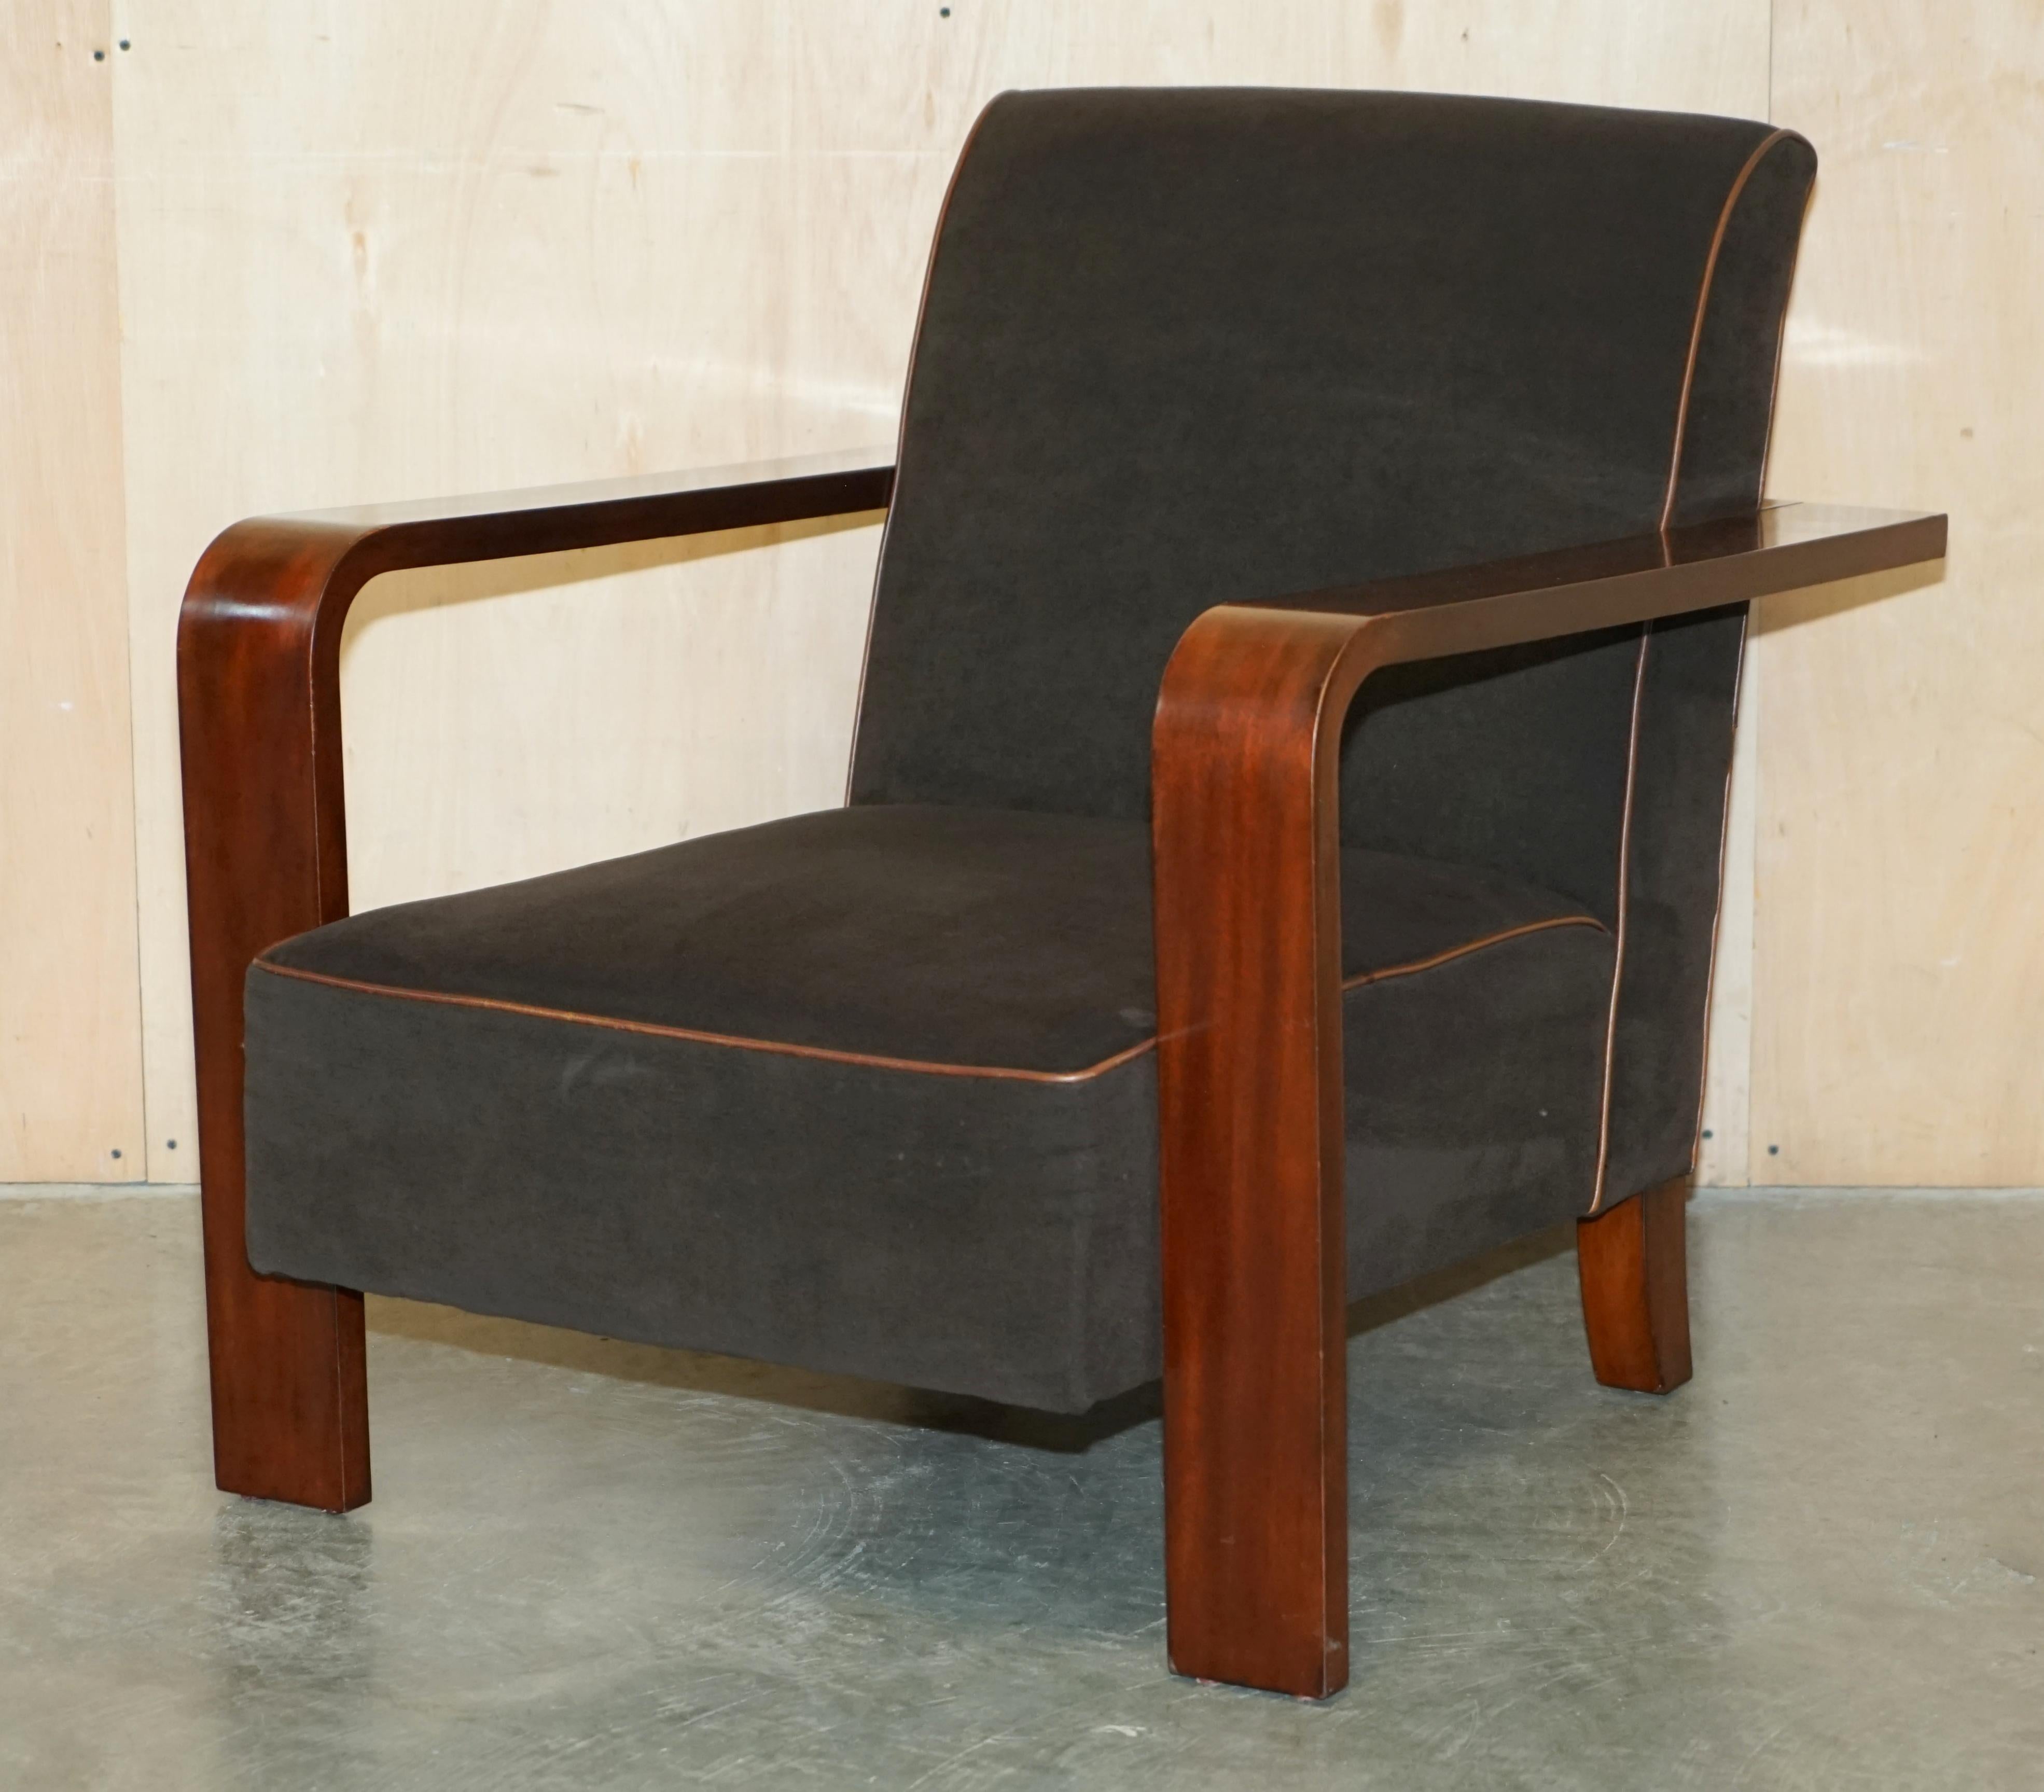 PAIR OF RALPH LAUREN LOUNGE MODERNE HARDWOOD ARMCHAiRS MOHAIR LEATHEr For Sale 8